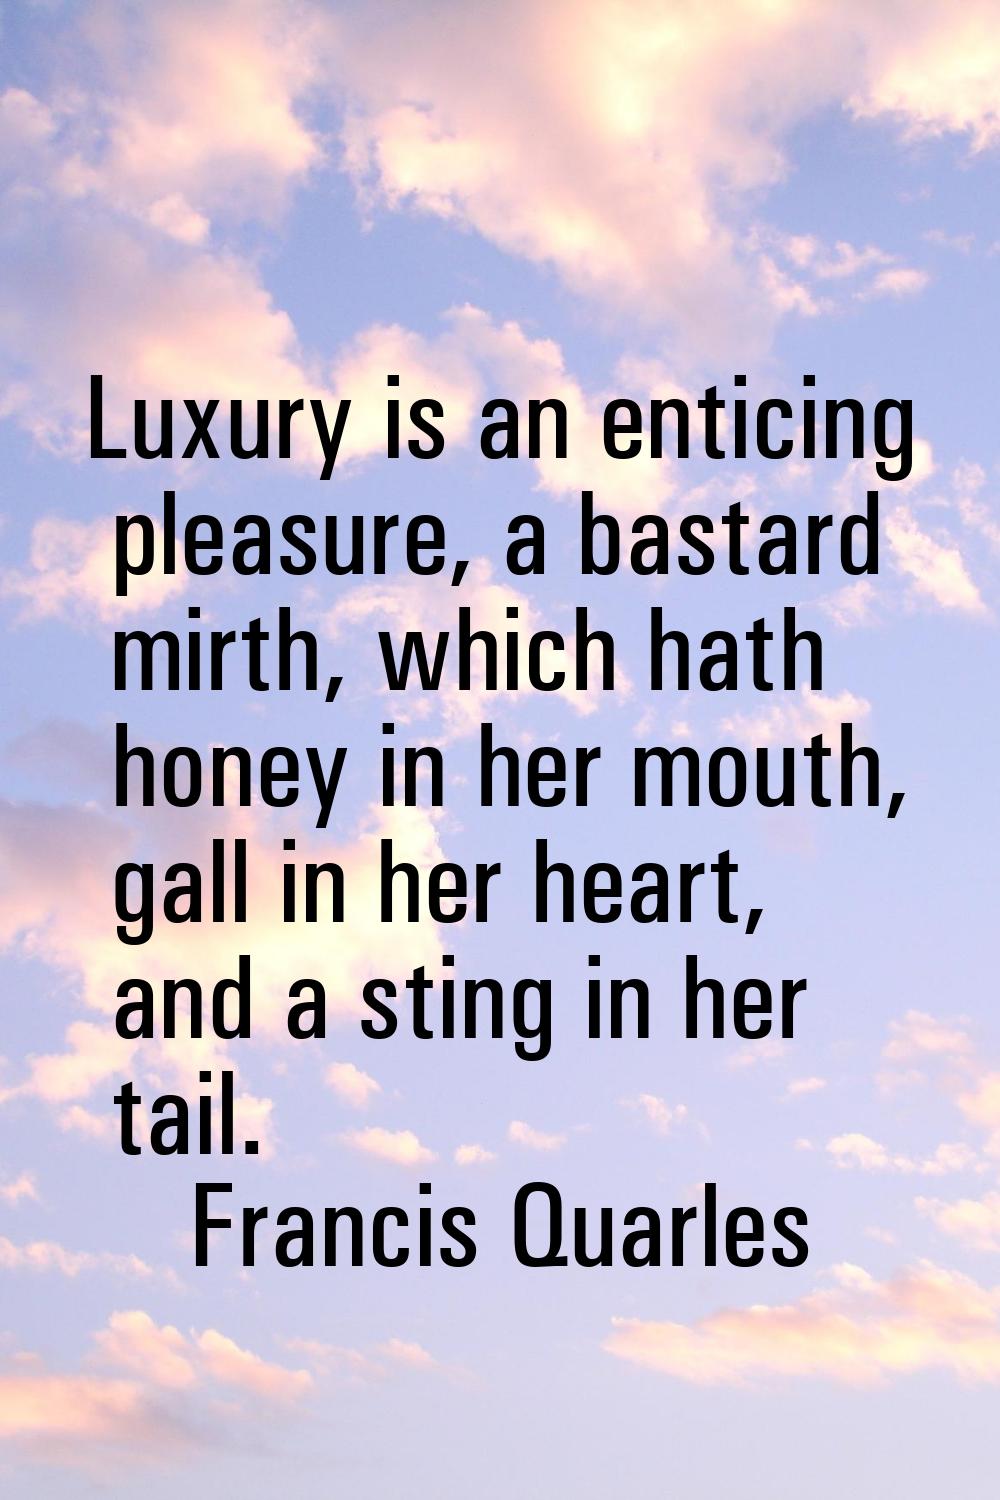 Luxury is an enticing pleasure, a bastard mirth, which hath honey in her mouth, gall in her heart, 